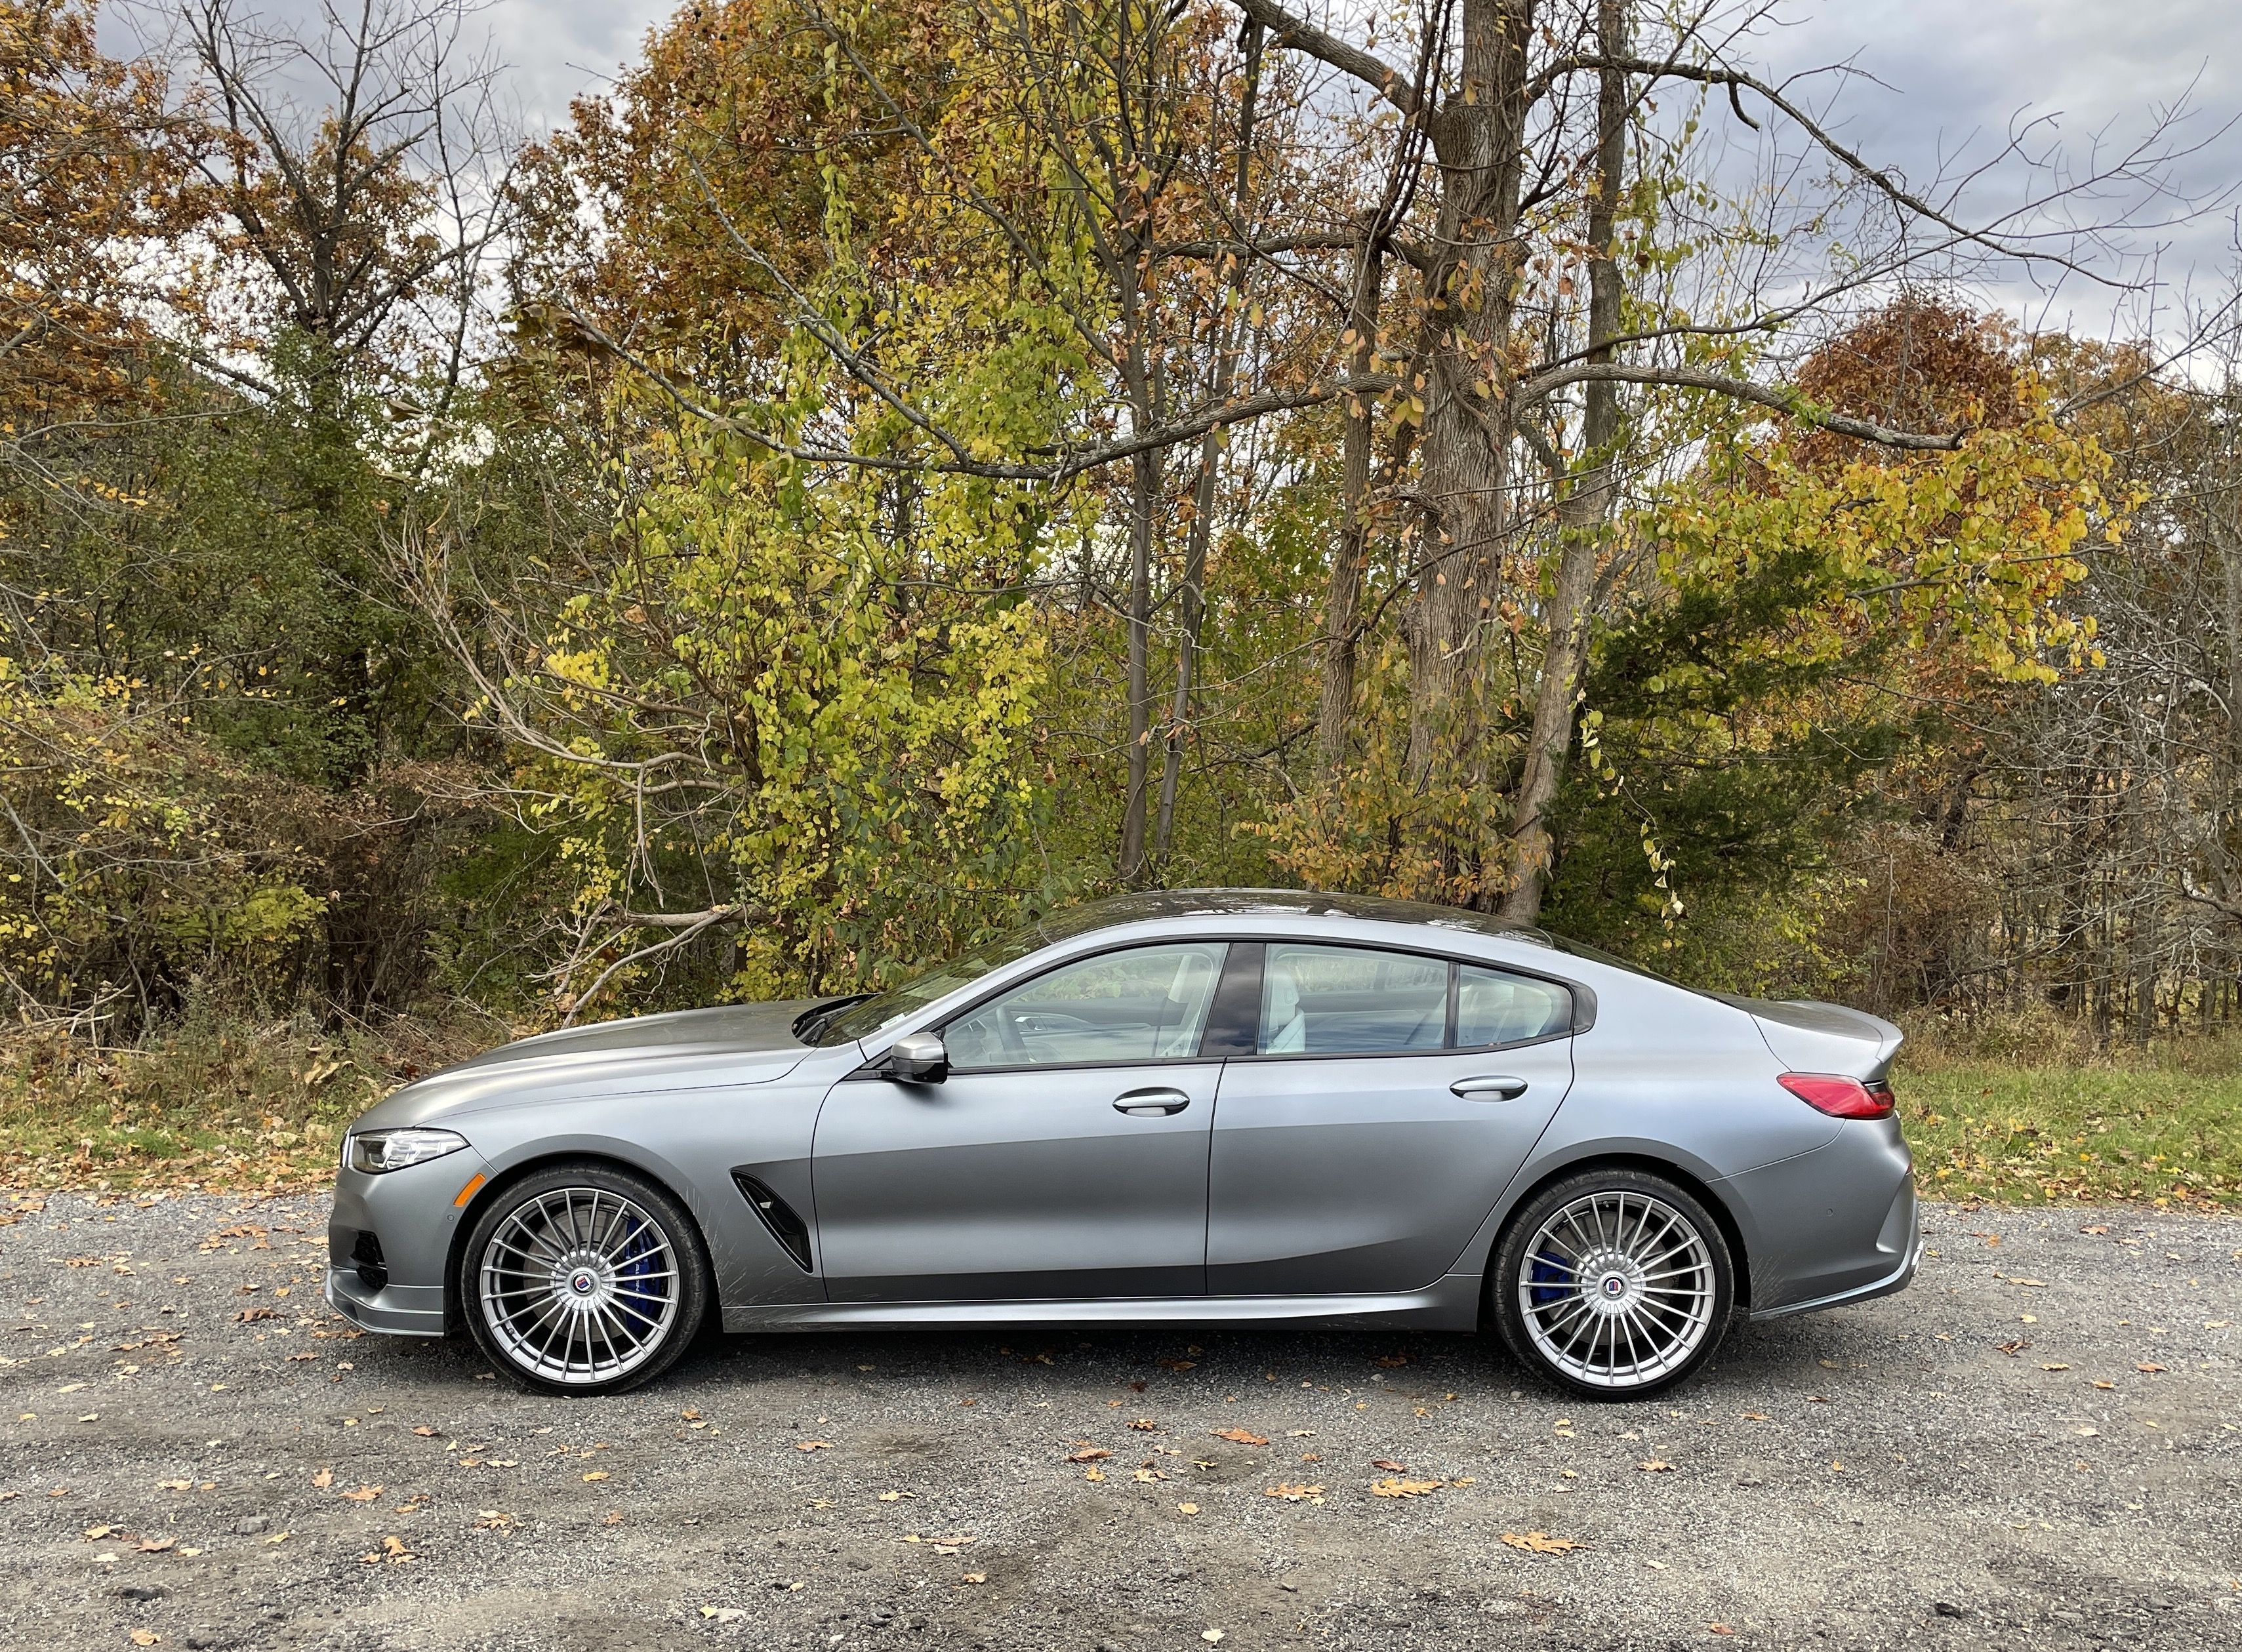 The 2022 BMW Alpina B8 Gran Coupe Review: a Great Grand Tourer